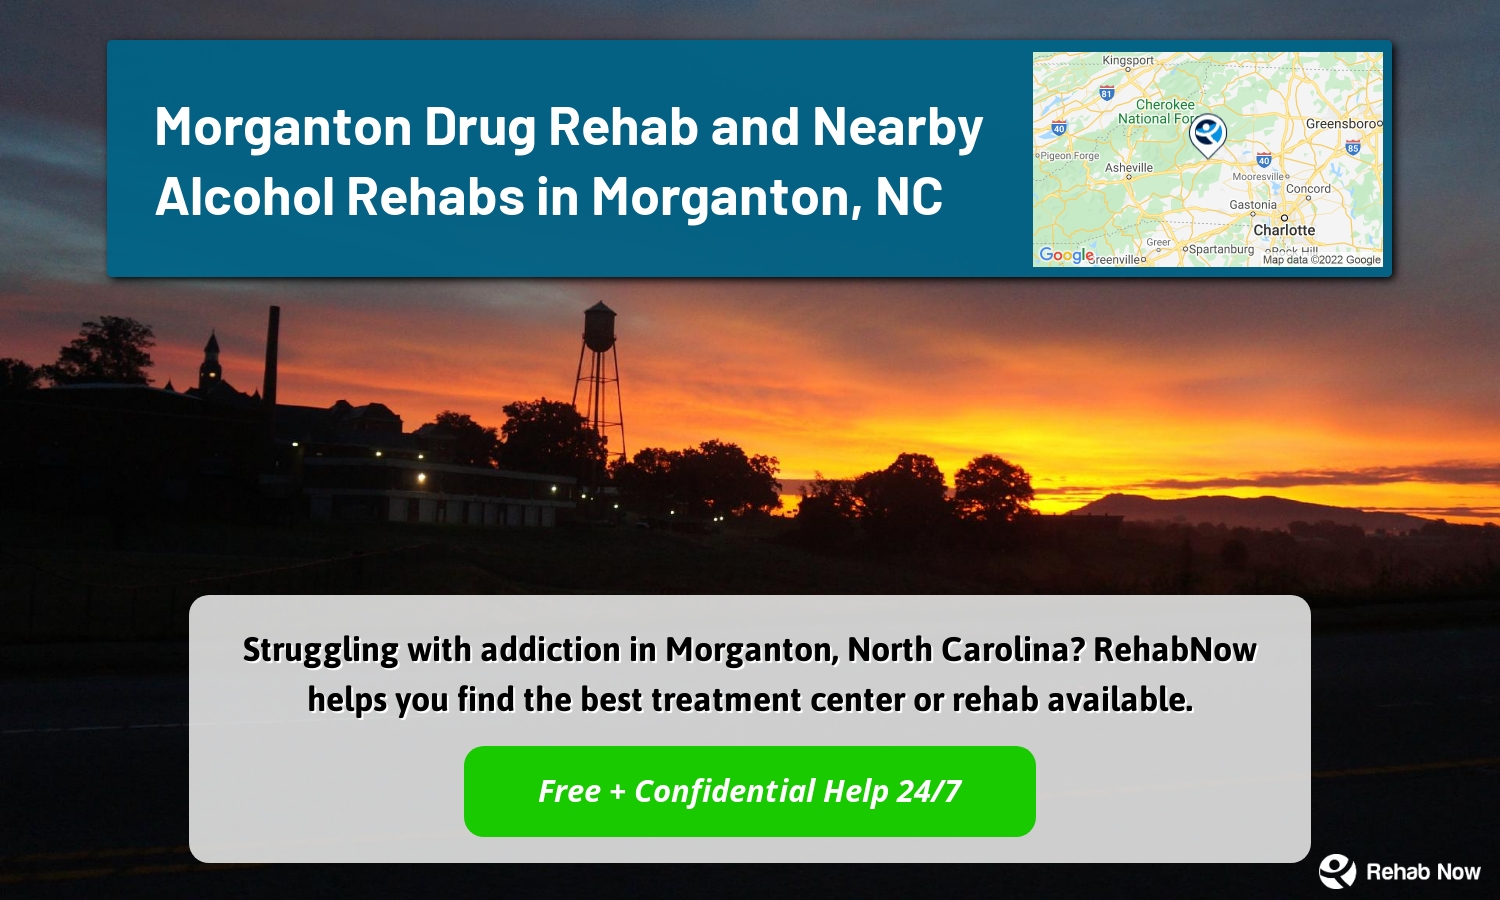 Struggling with addiction in Morganton, North Carolina? RehabNow helps you find the best treatment center or rehab available.